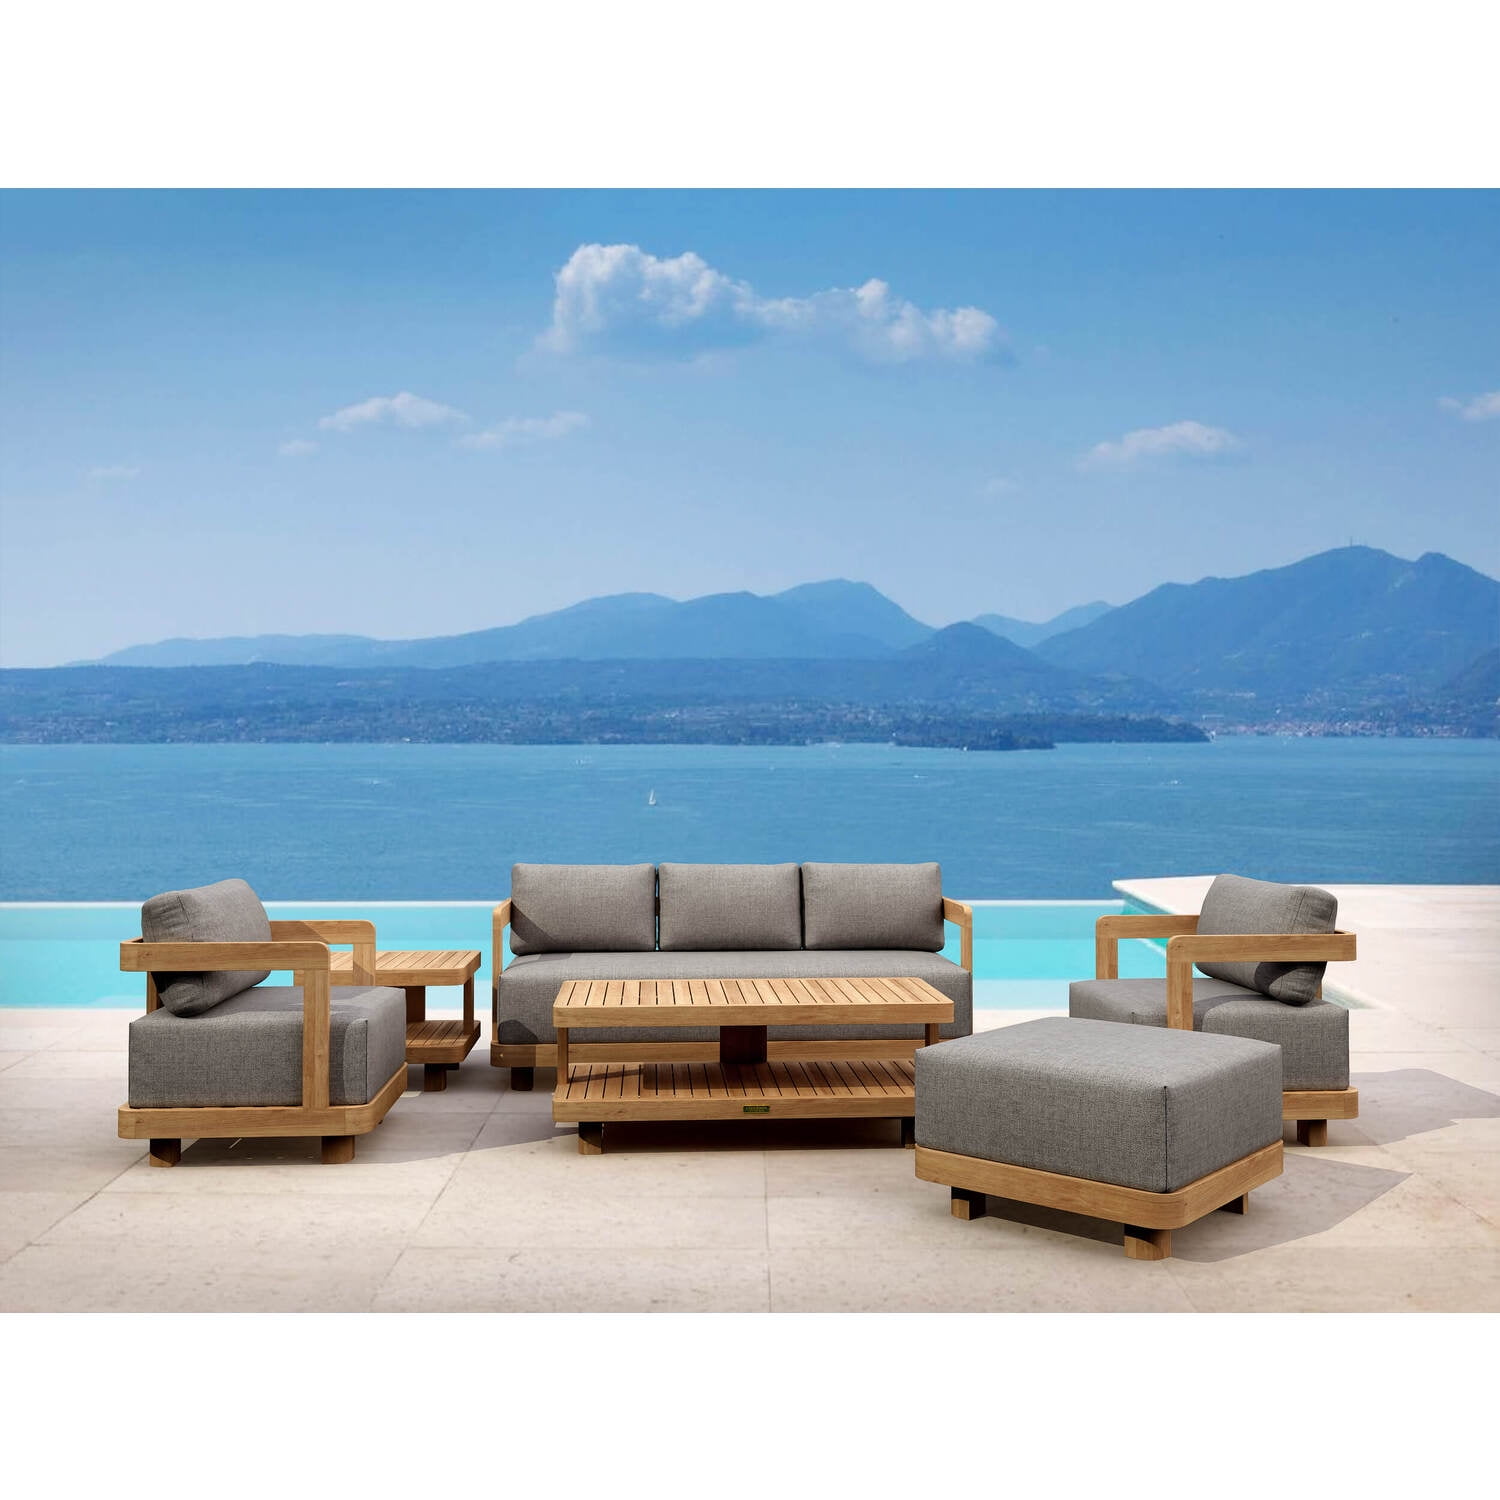 Picture of Anderson Teak SET-901 Granada Deep Seating Set, Natural Smooth Well Sanded - 6 Piece